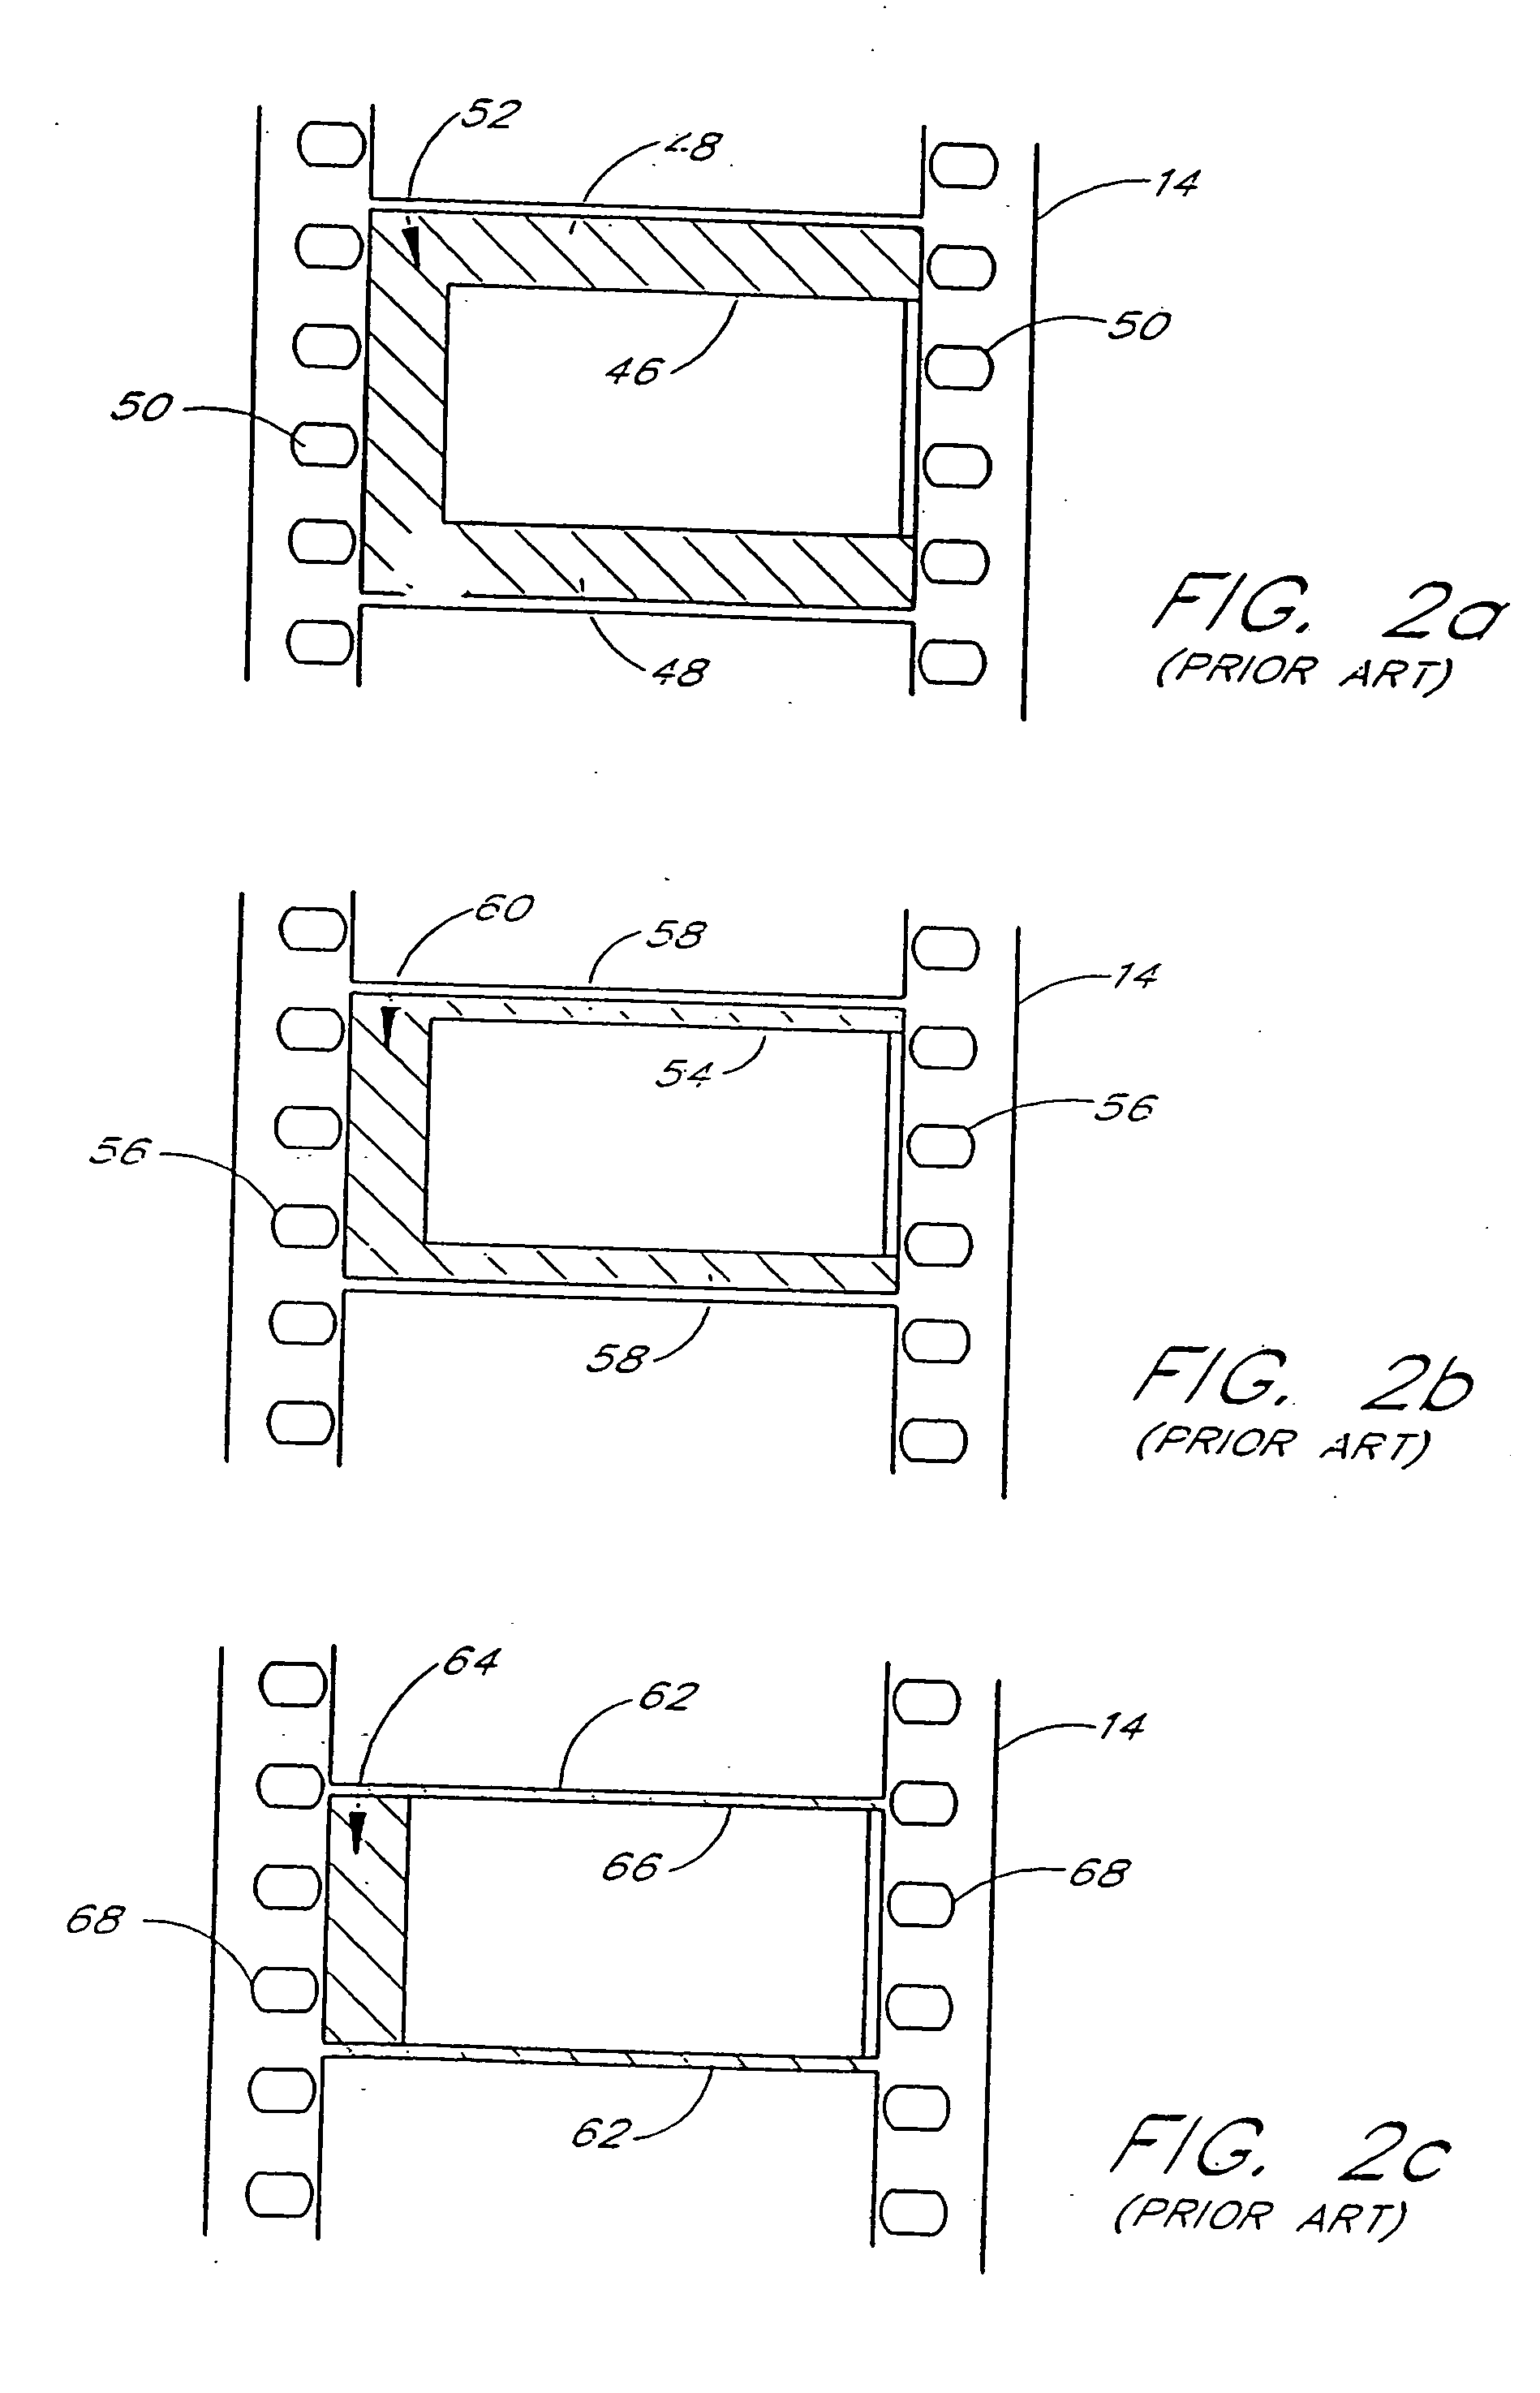 Method of making motion picture release-print film